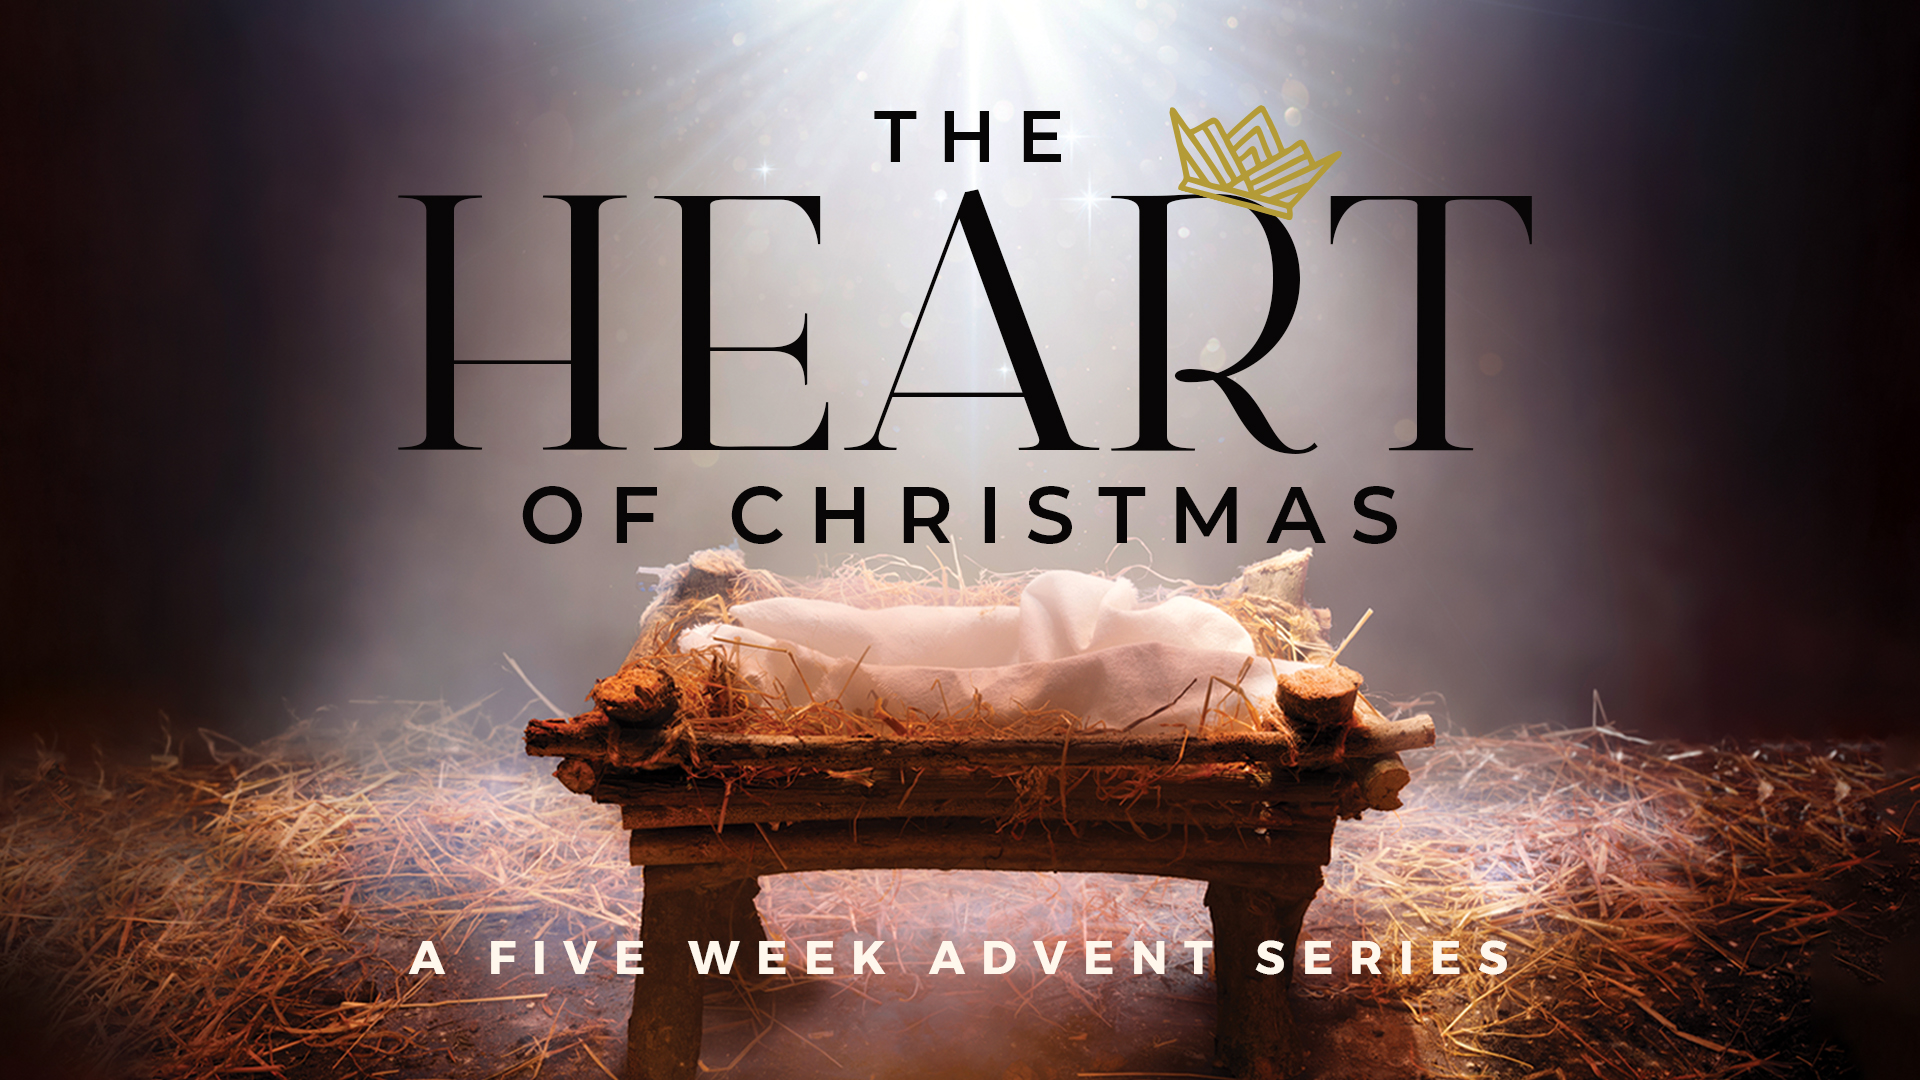 The Heart of Christmas is Love